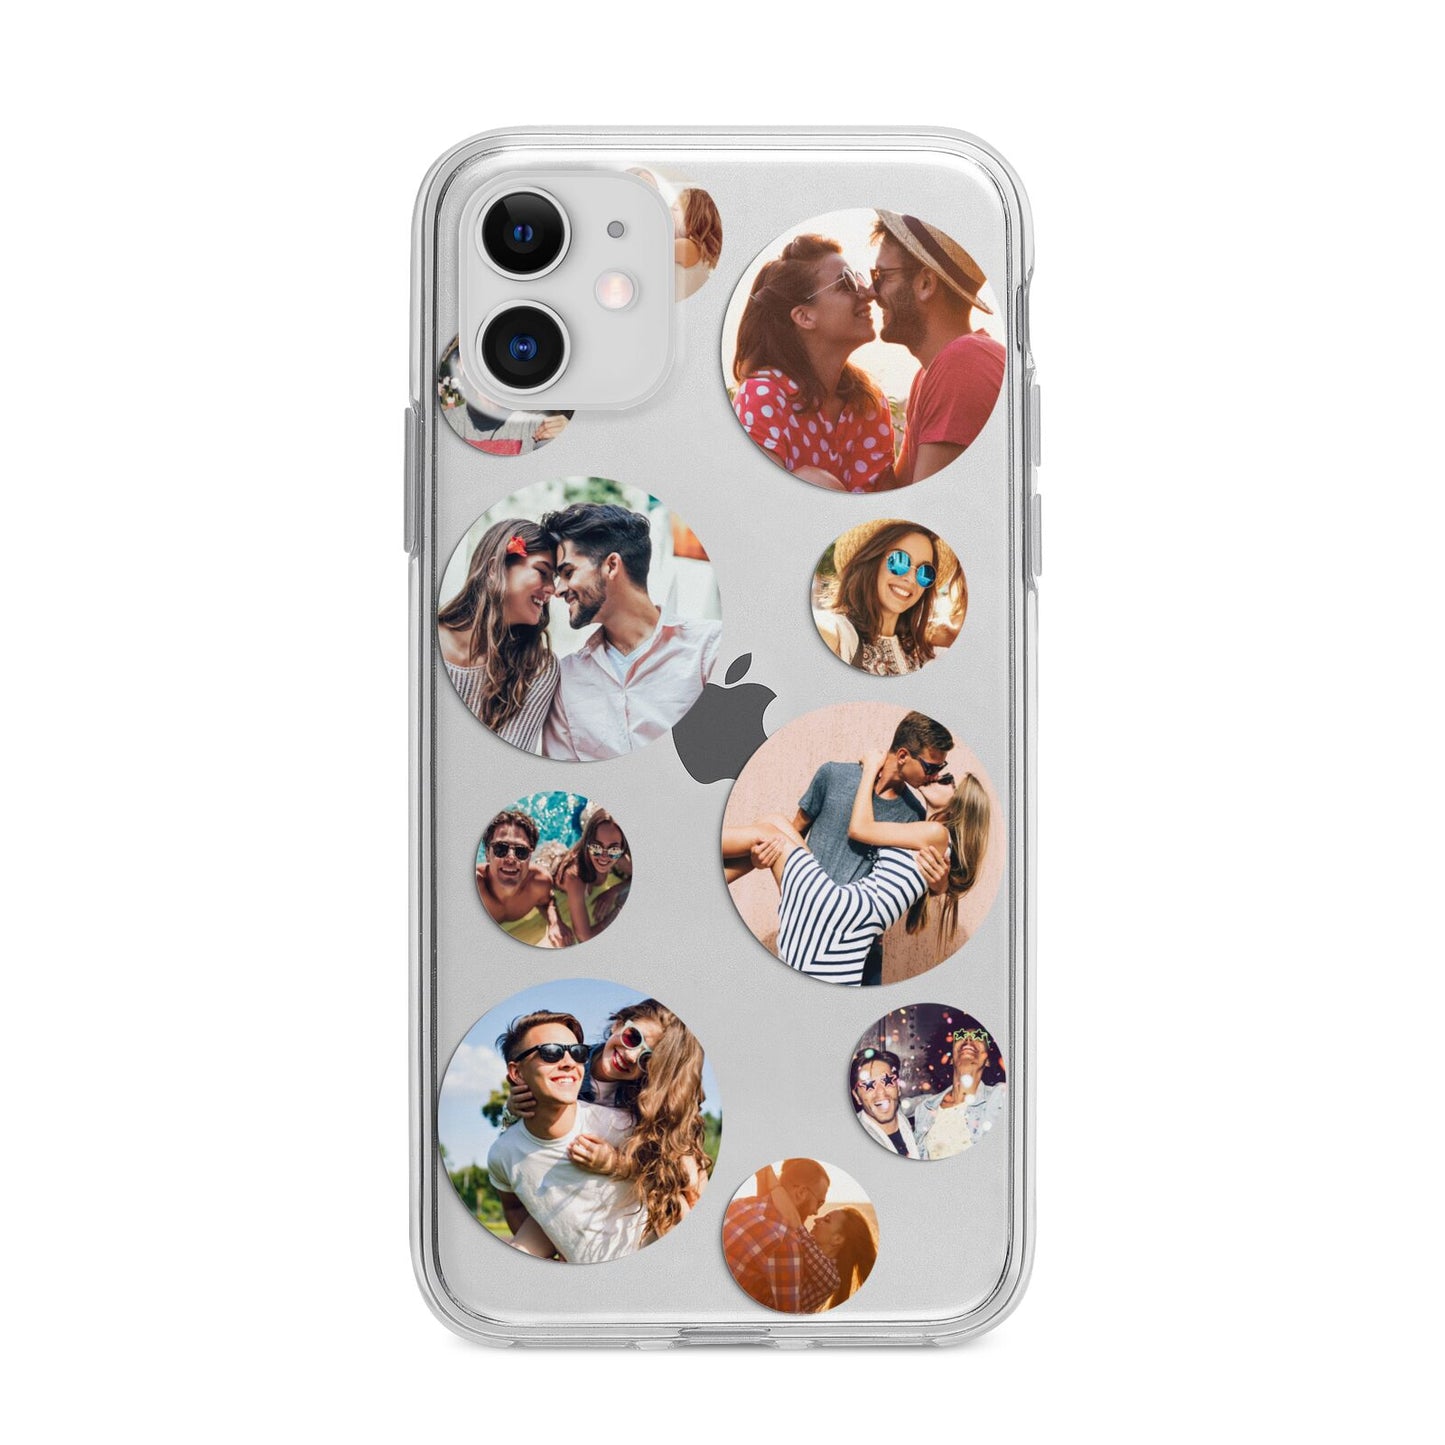 Multi Circular Photo Collage Upload Apple iPhone 11 in White with Bumper Case